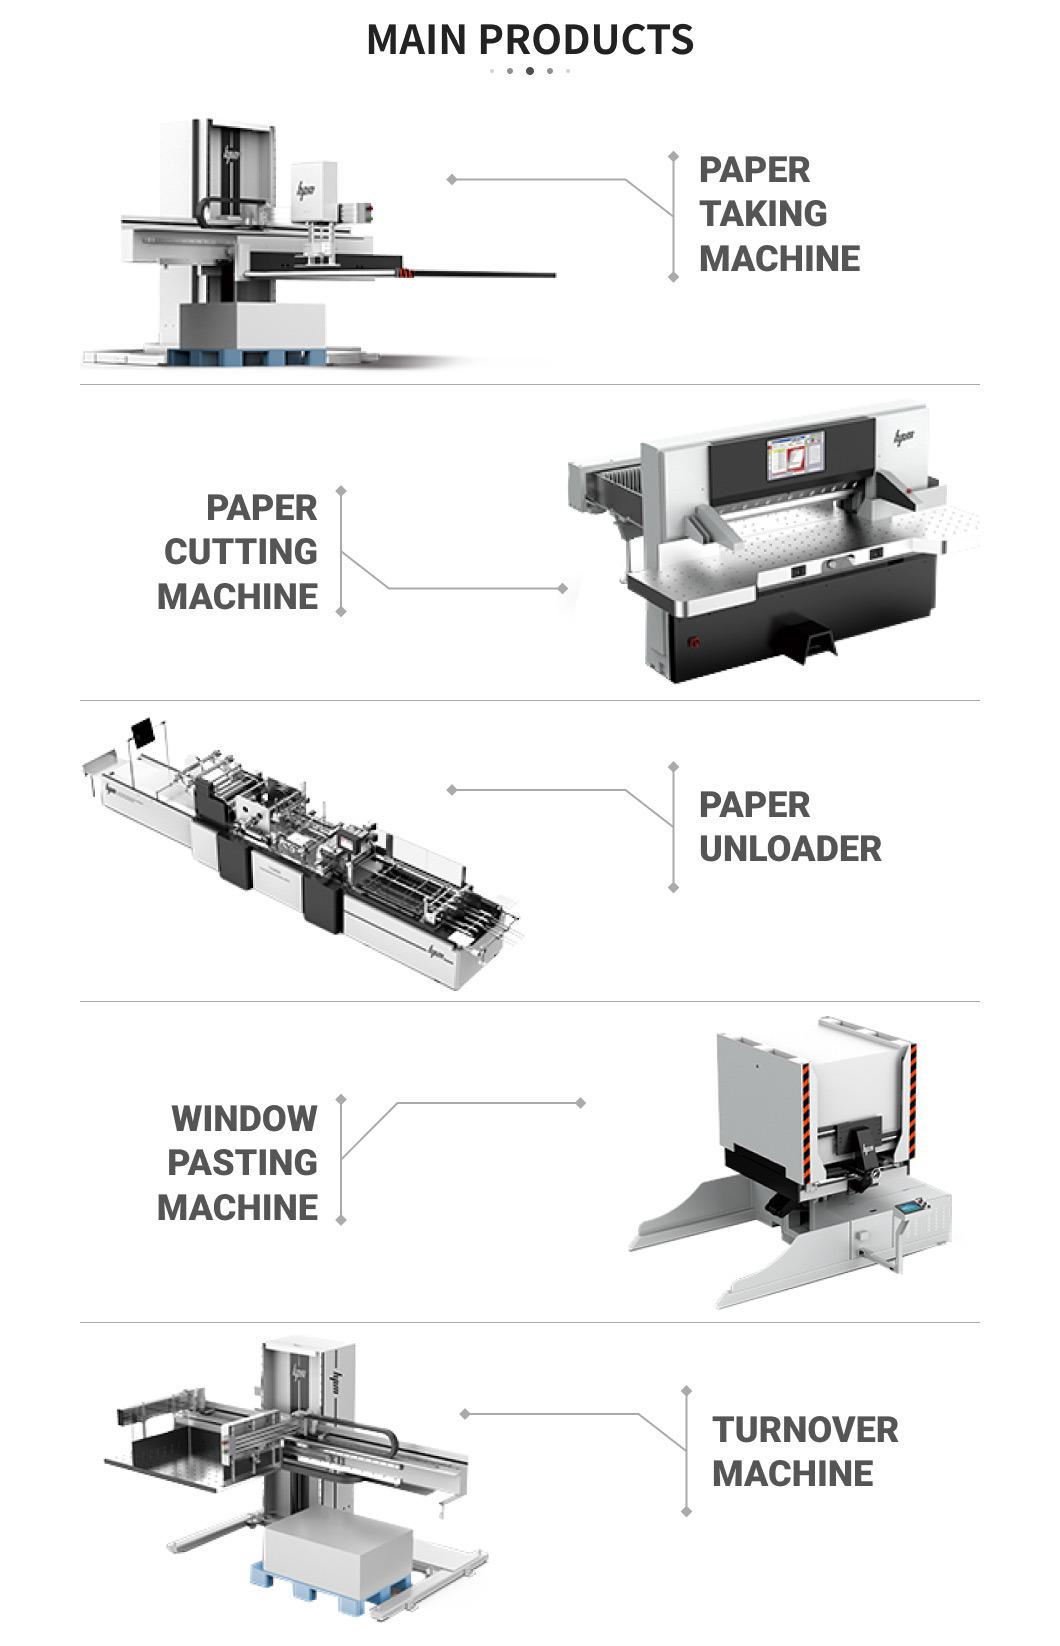 Automatic High Speed Intelligent Guillotine Program Control Hydraulic Heavy Duty Paper Cutter